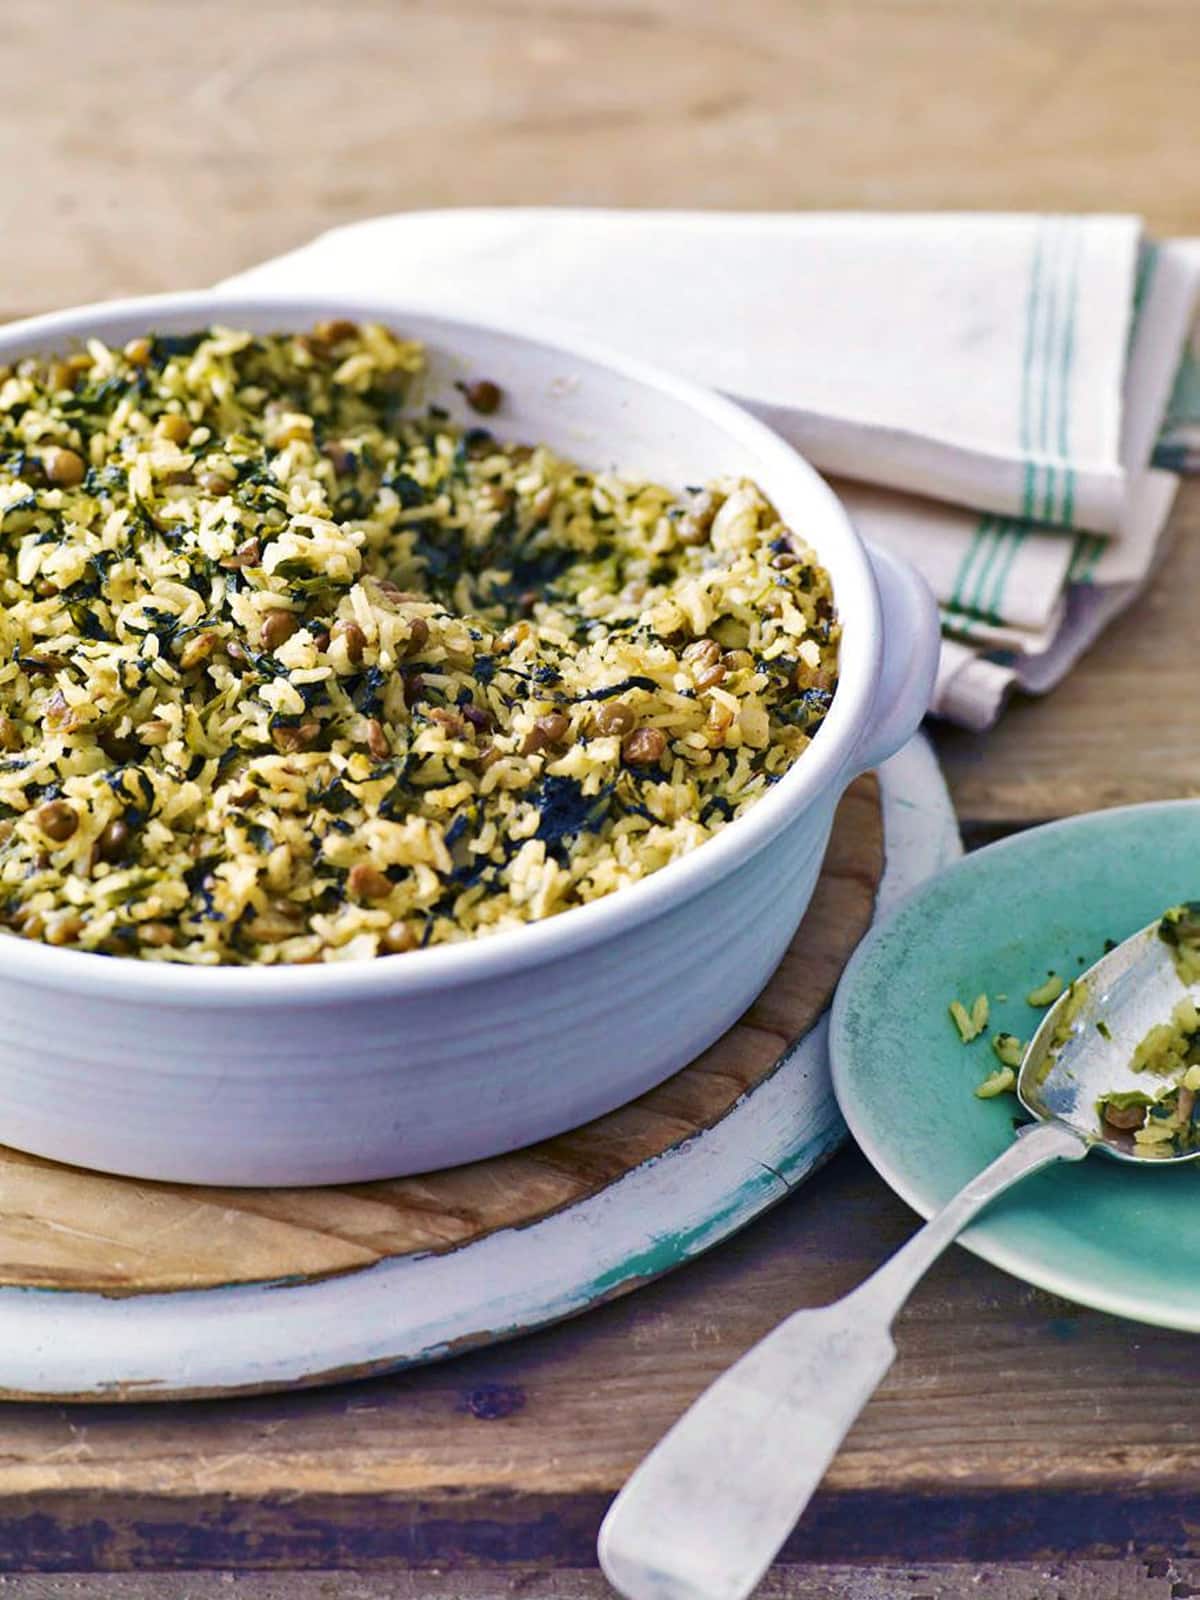 Curried spinach and lentil bake